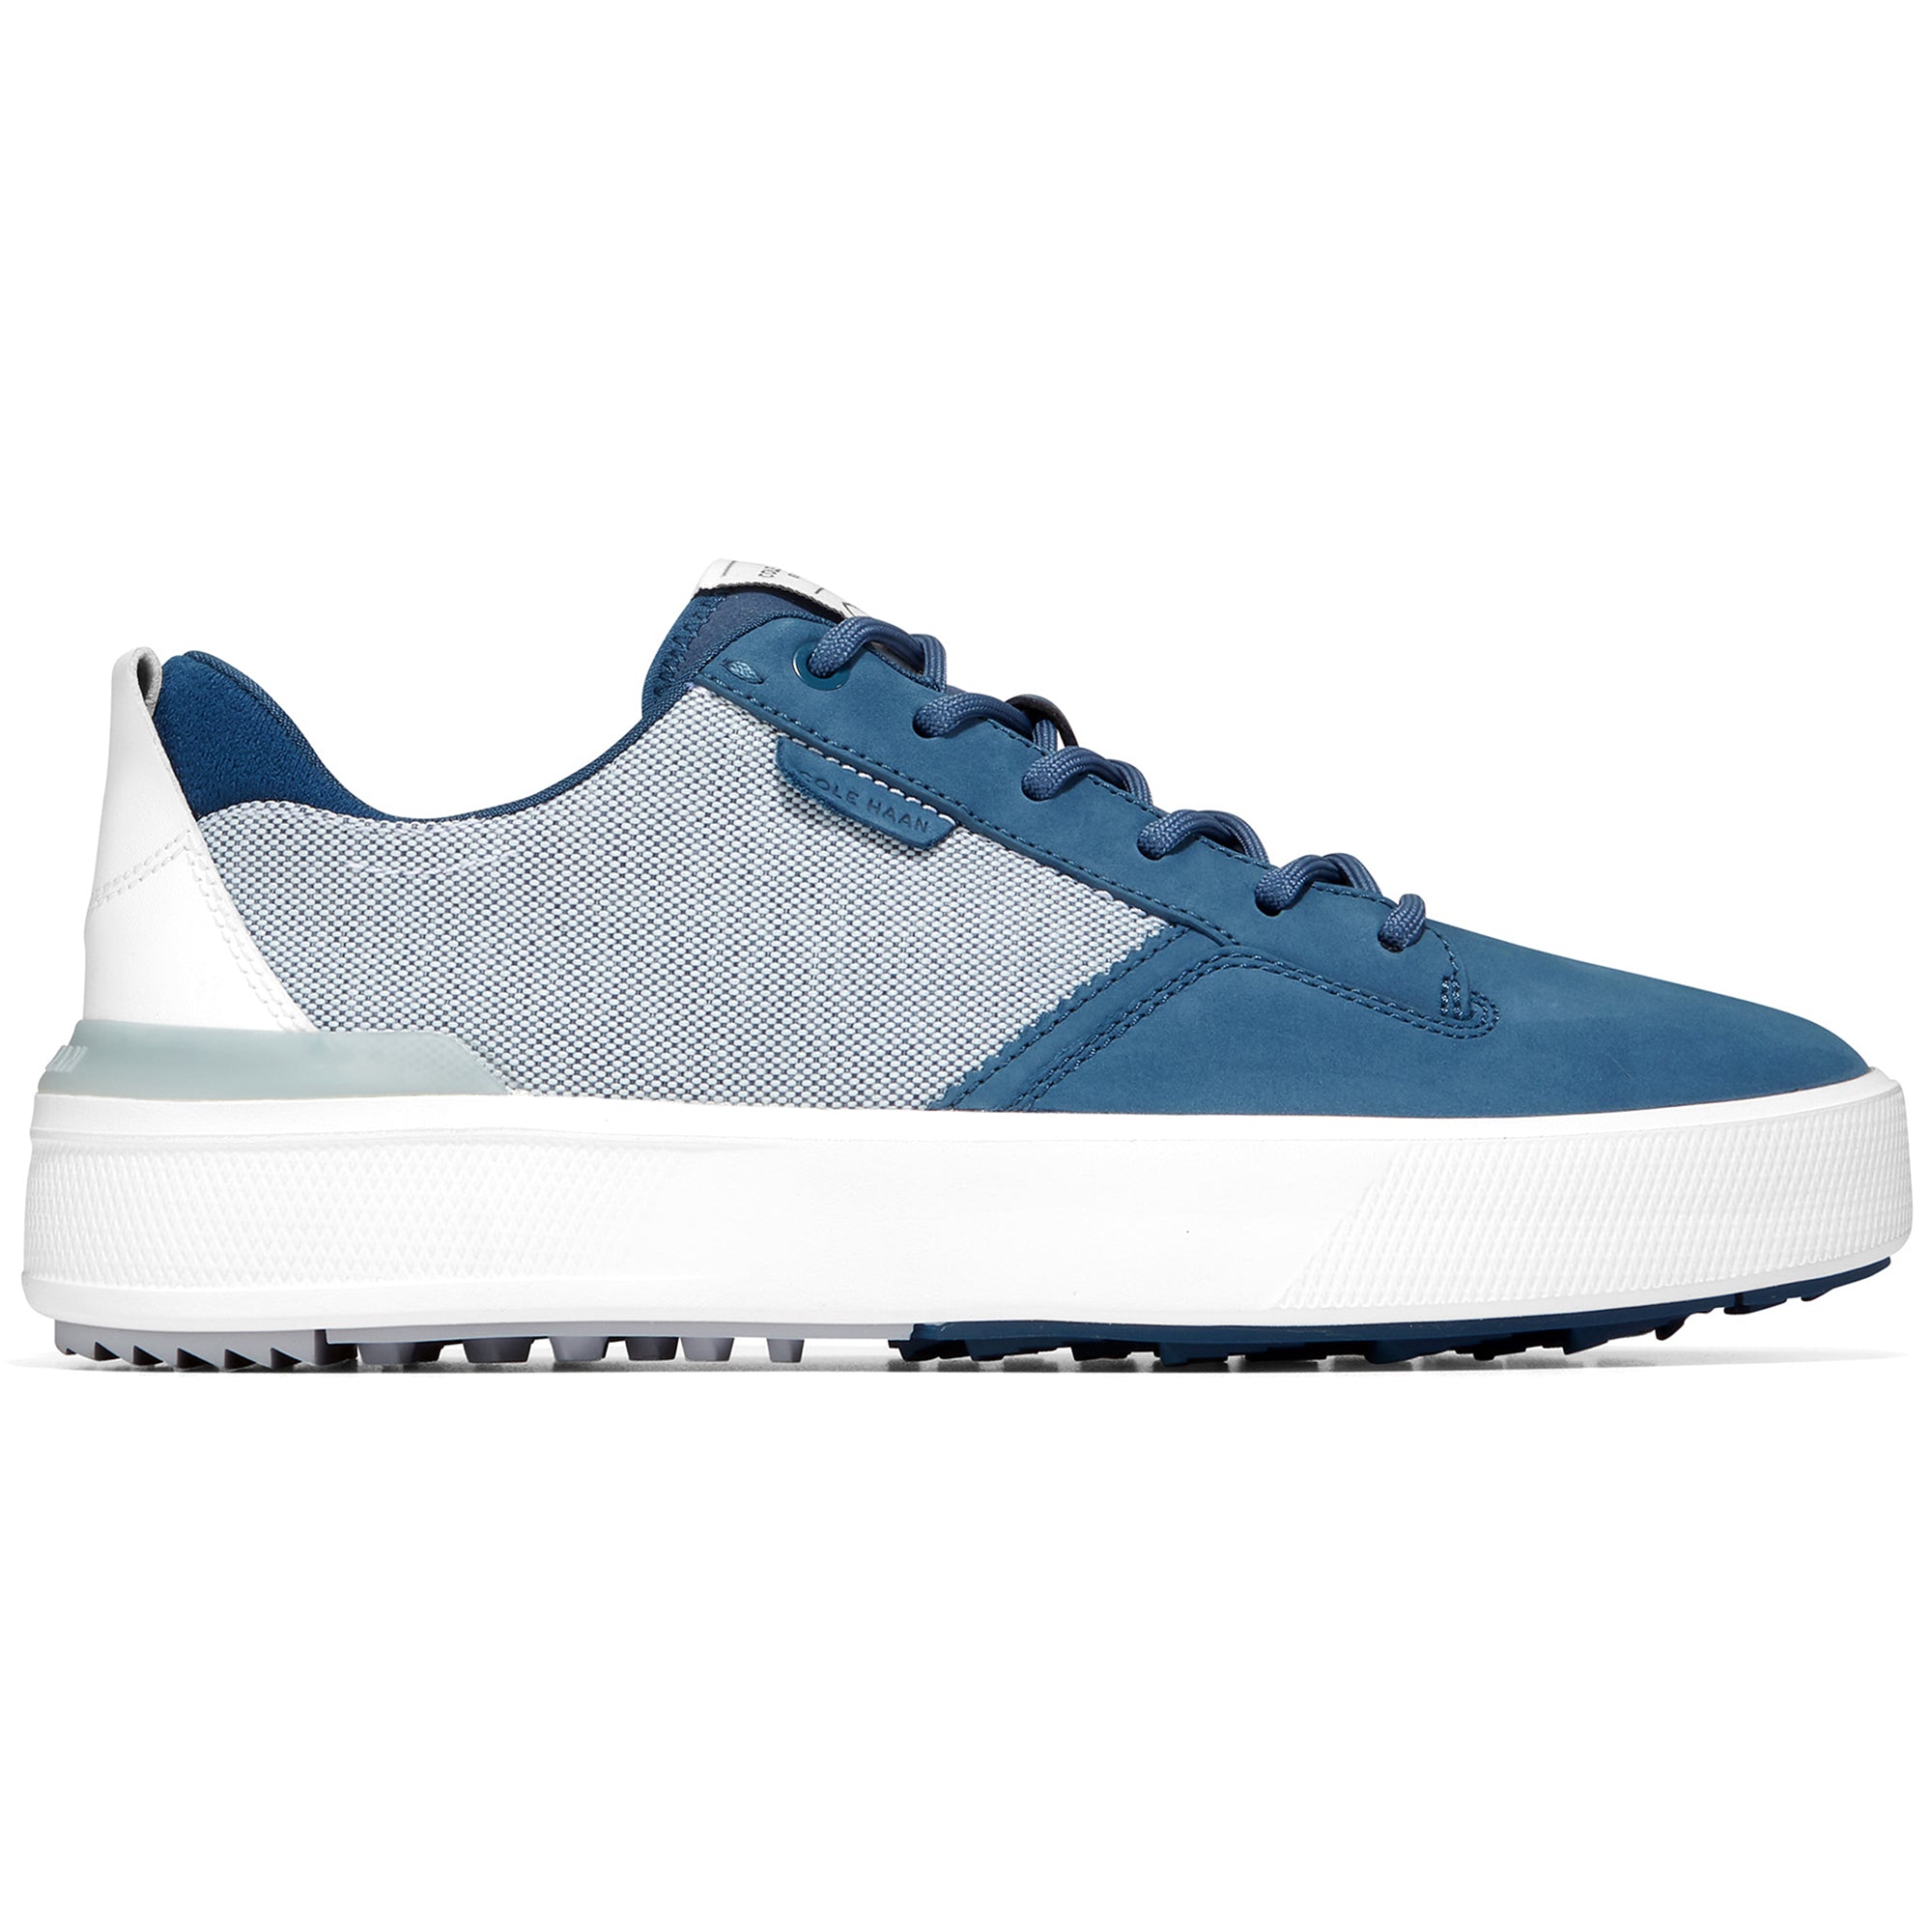 Cole Haan Grandpro Crew Golf Shoes C36794 Ensign Blue Optic White Micro ...